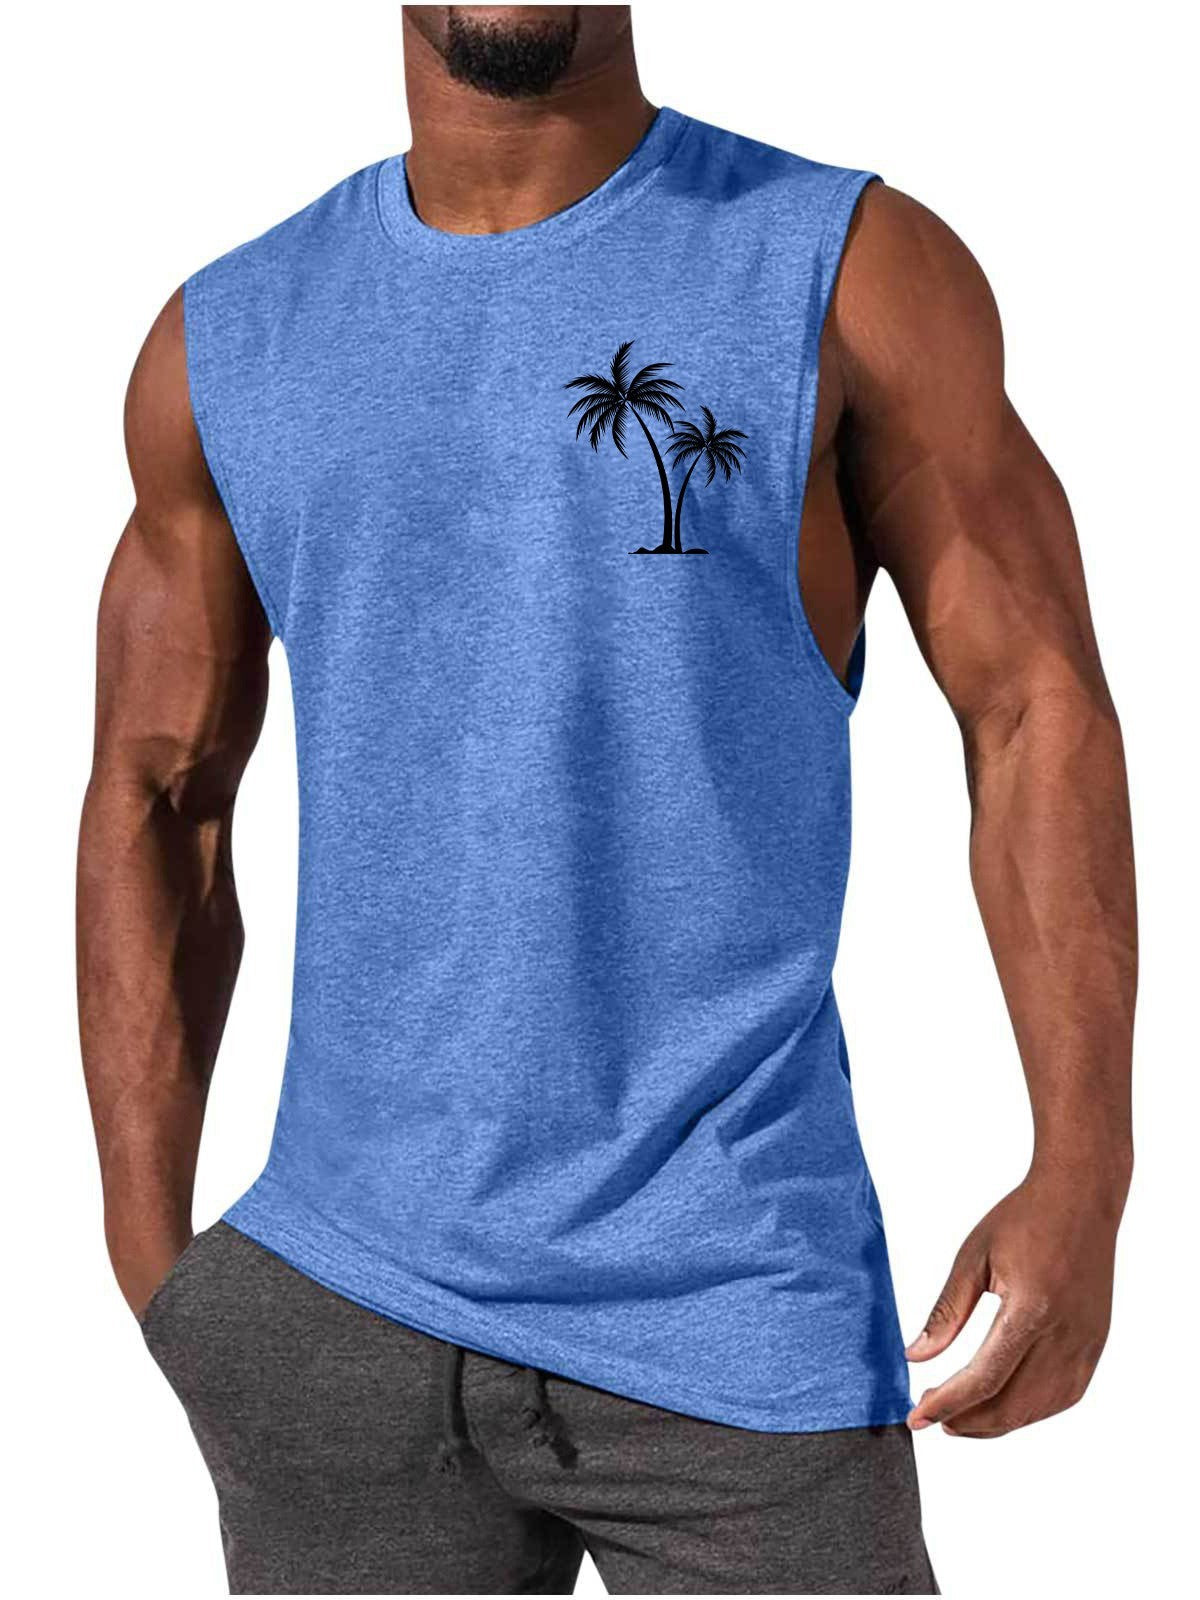 Coconut Tree Embroidery Vest Summer Beach Tank Tops apparel & accessories